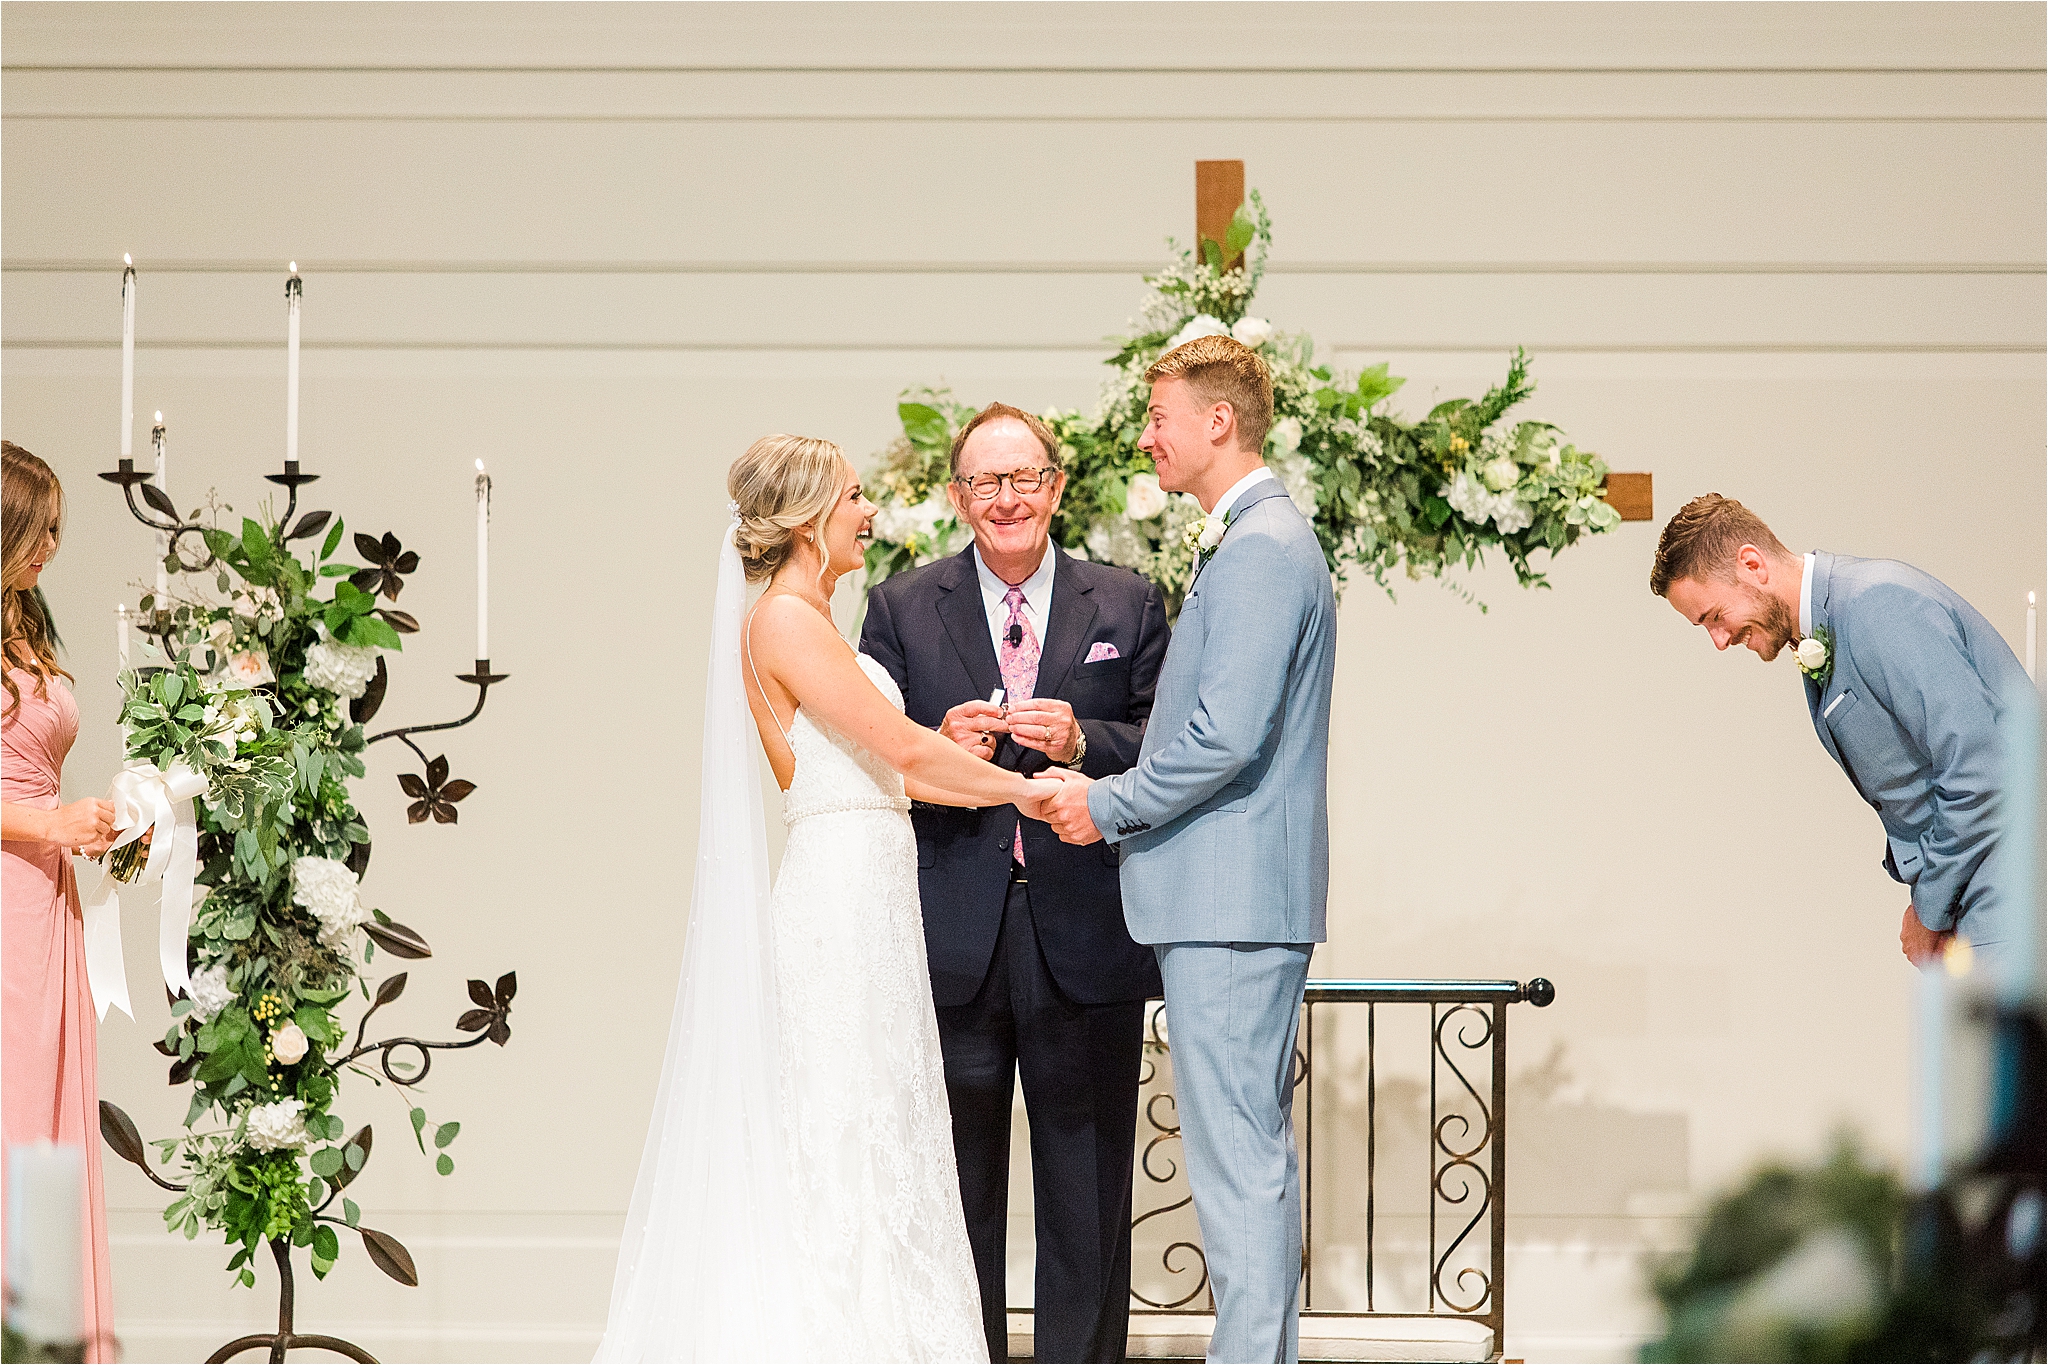 A bride and groom laugh as they exchange wedding vows during their Dallas Wedding Ceremony at Prestonwood Chapel by DFW Wedding Photographer Jillian Hogan 